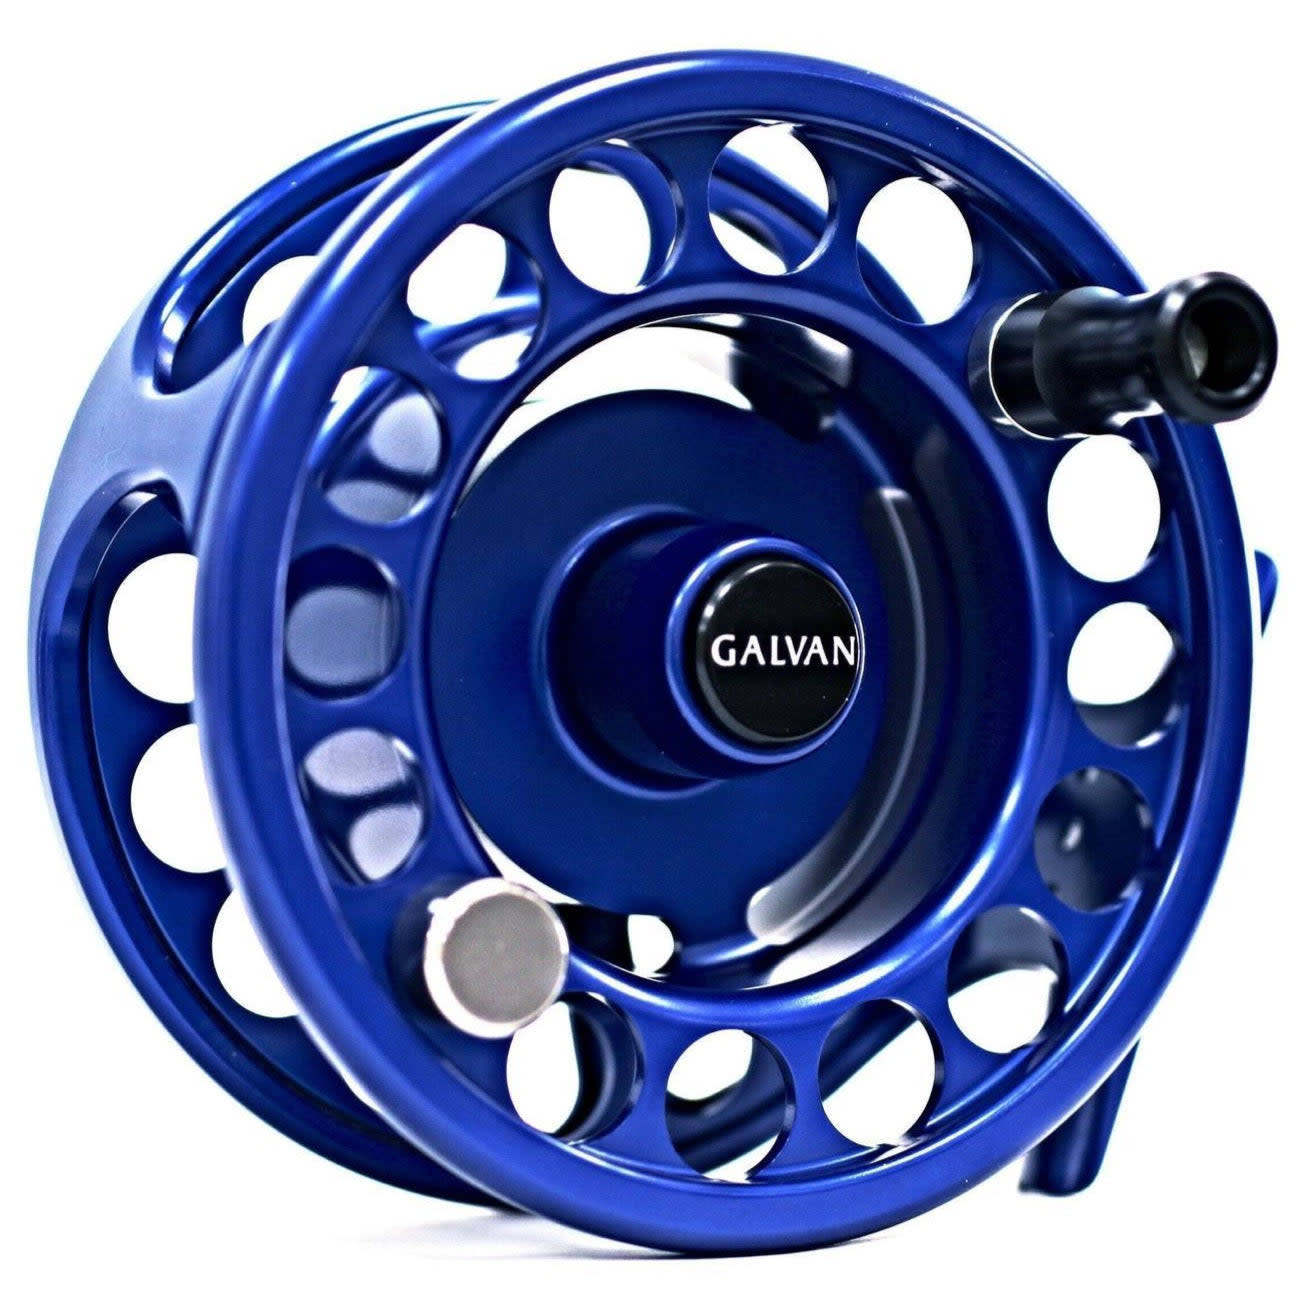 Galvan Rush Light 5 Fly Reel Blue - The Painted Trout